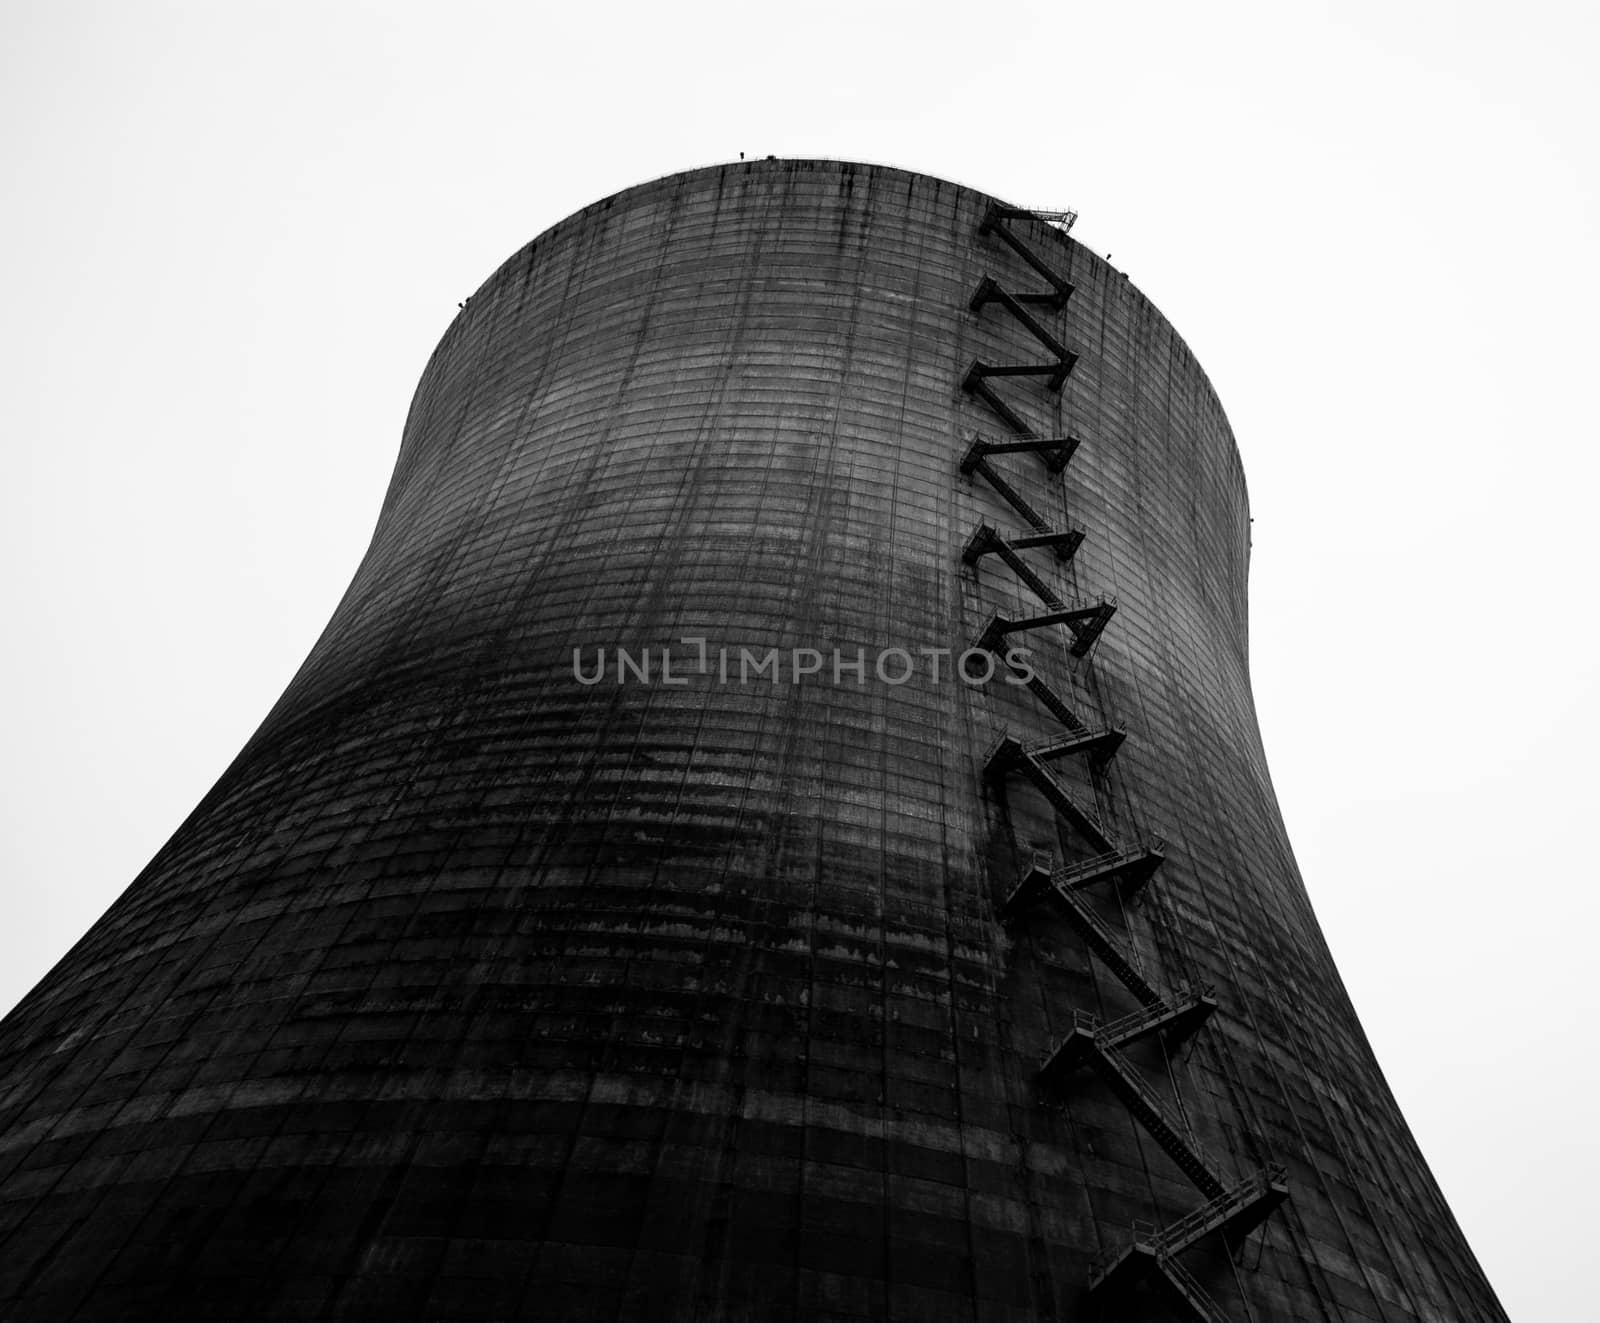 Nuclear reactor cooling tower taken in black and white by experiencesnw